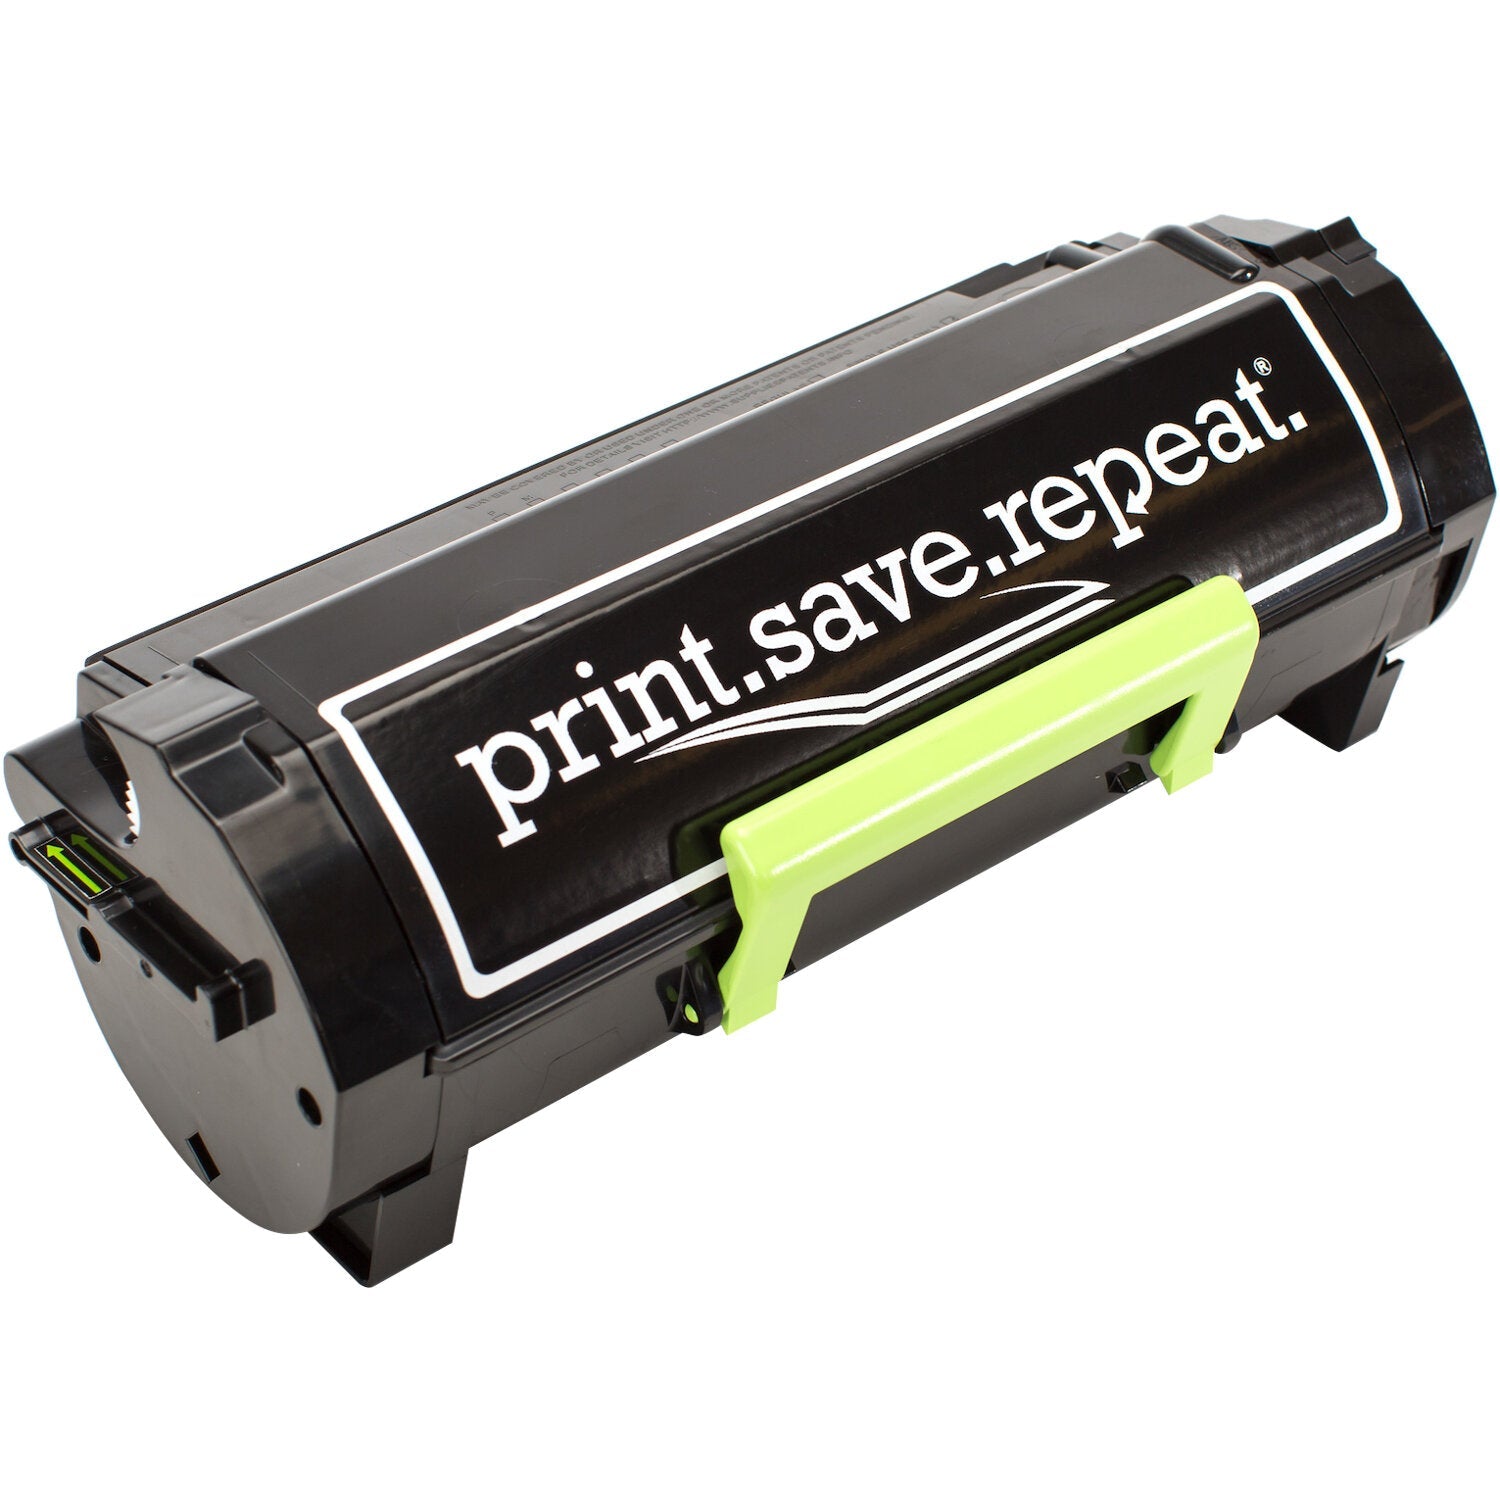 Print.Save.Repeat. Lexmark 51B0XA0 Remanufactured Extra High Yield Toner Cartridge for MS517, MS617, MX517, MX617 [20,000 Pages]